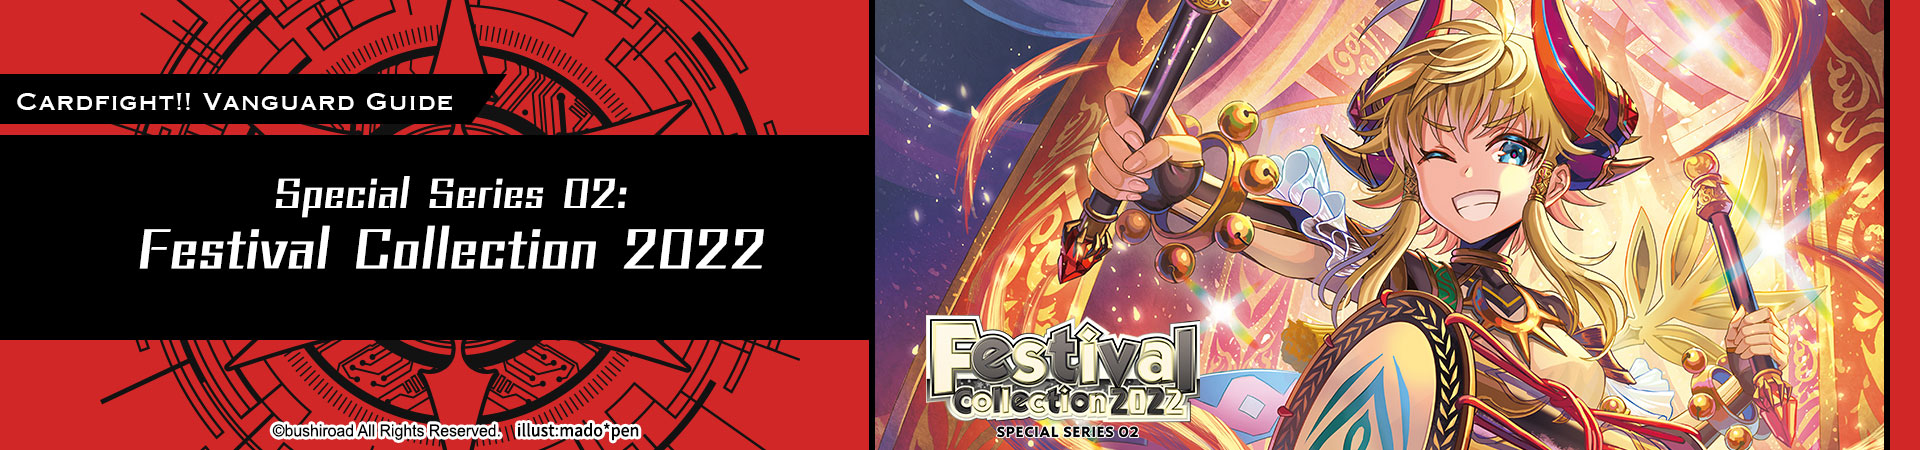 Festival Collection 2022 Official Guide Top Banner